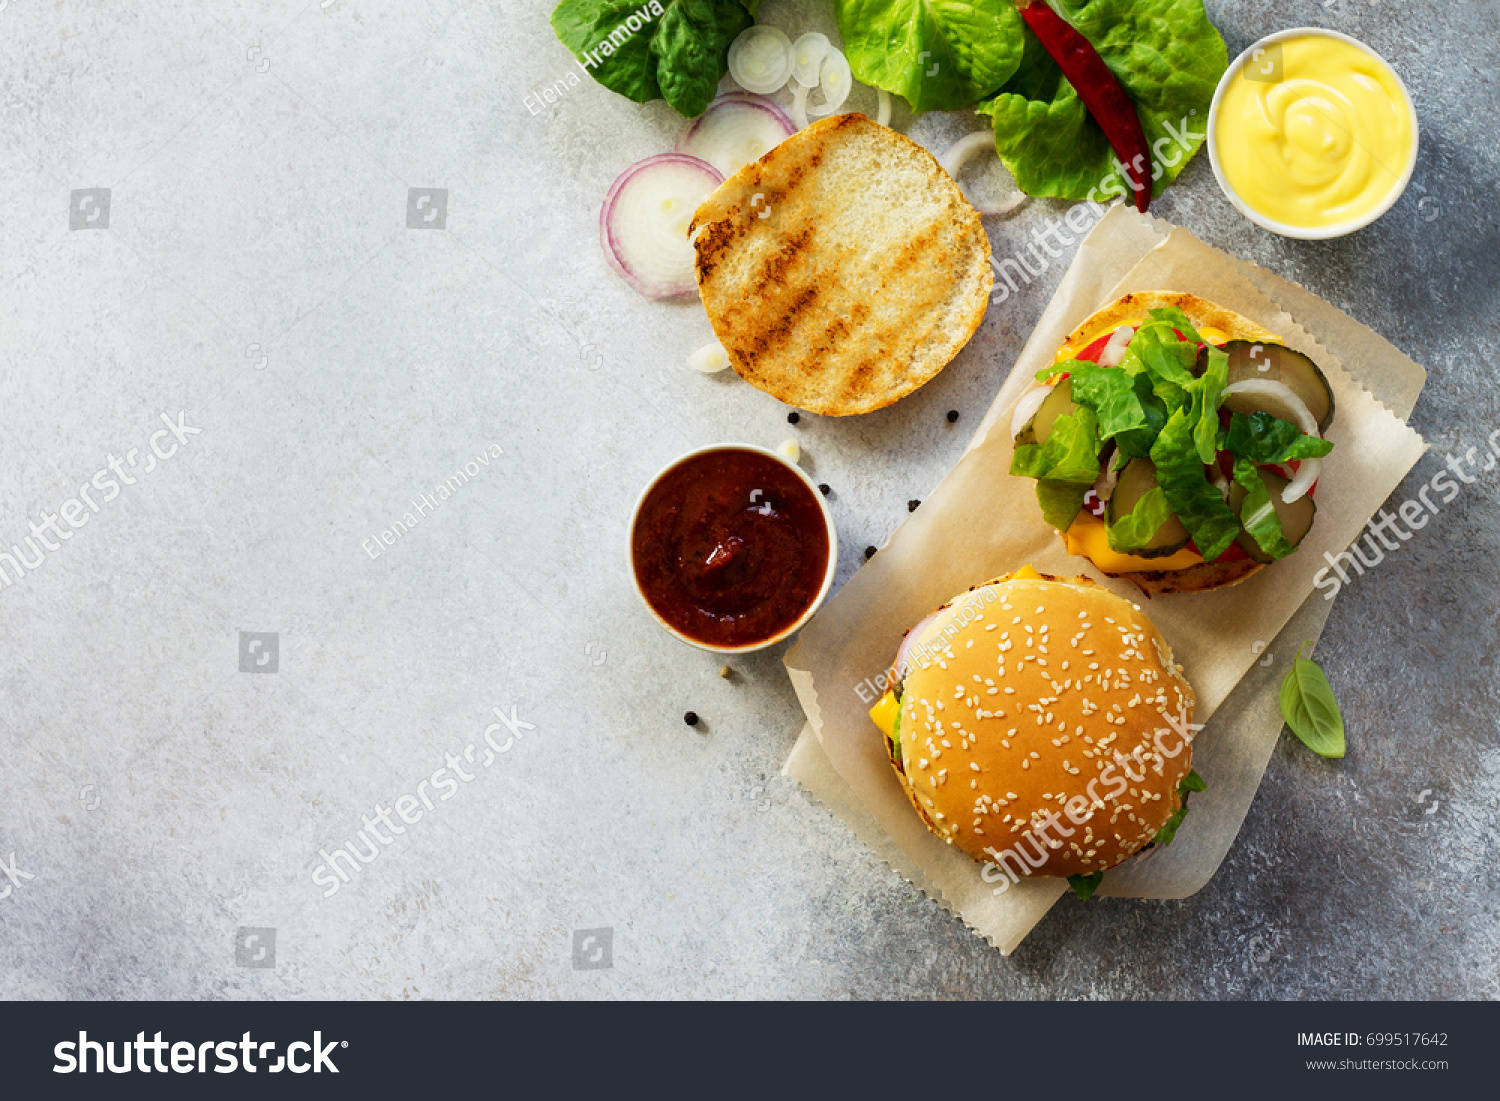 A delicious fresh homemade hamburger on a slate or stone table. Cheeseburger with meatball and vegetables. Street food, fast food. Top view with copy space. #699517642